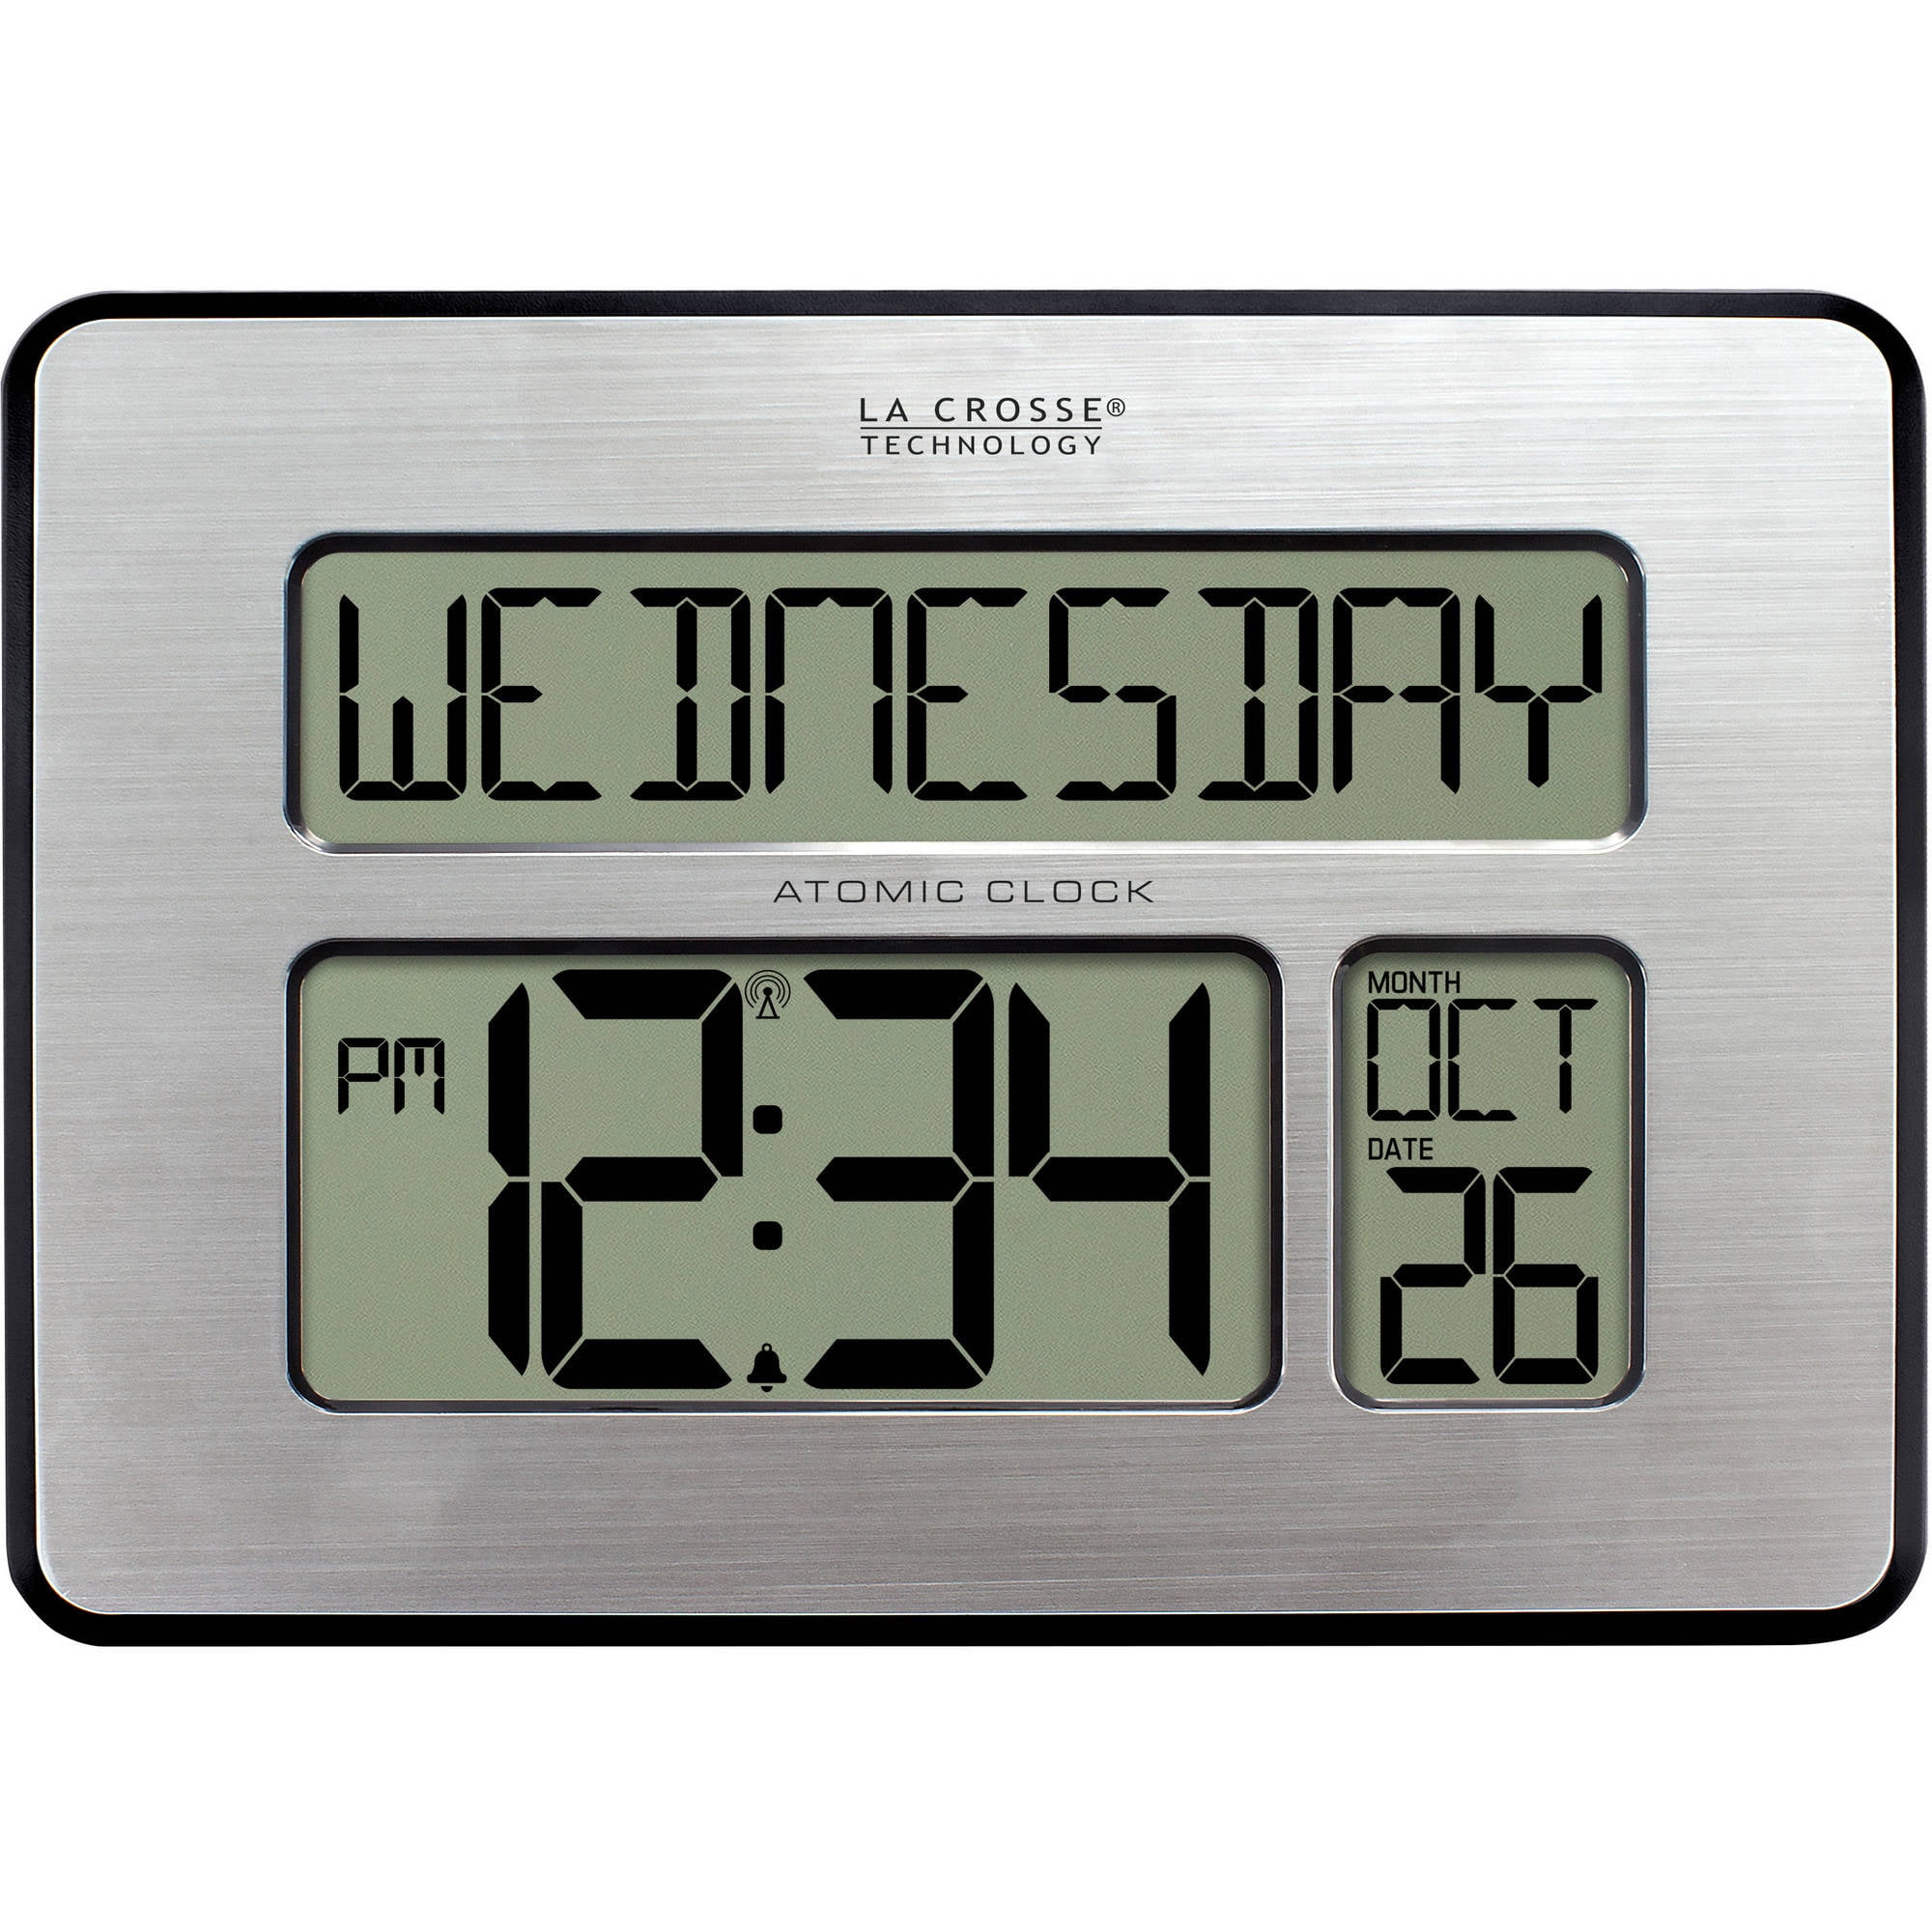 Details about   La Crosse Technology Analog Wall Clock Atomic Multiple Time Zones Non-Ticking 